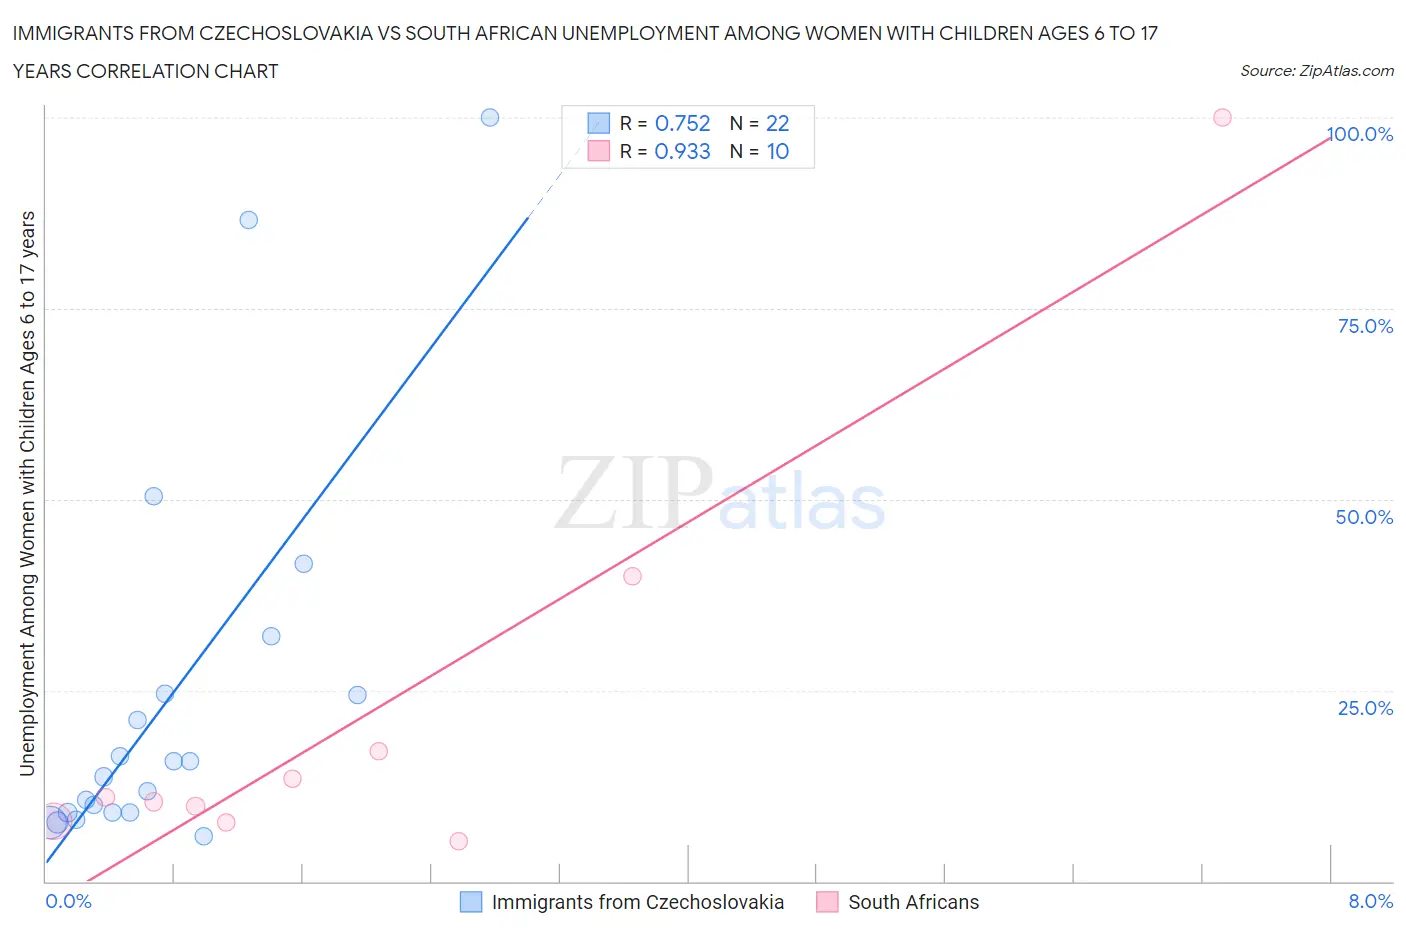 Immigrants from Czechoslovakia vs South African Unemployment Among Women with Children Ages 6 to 17 years